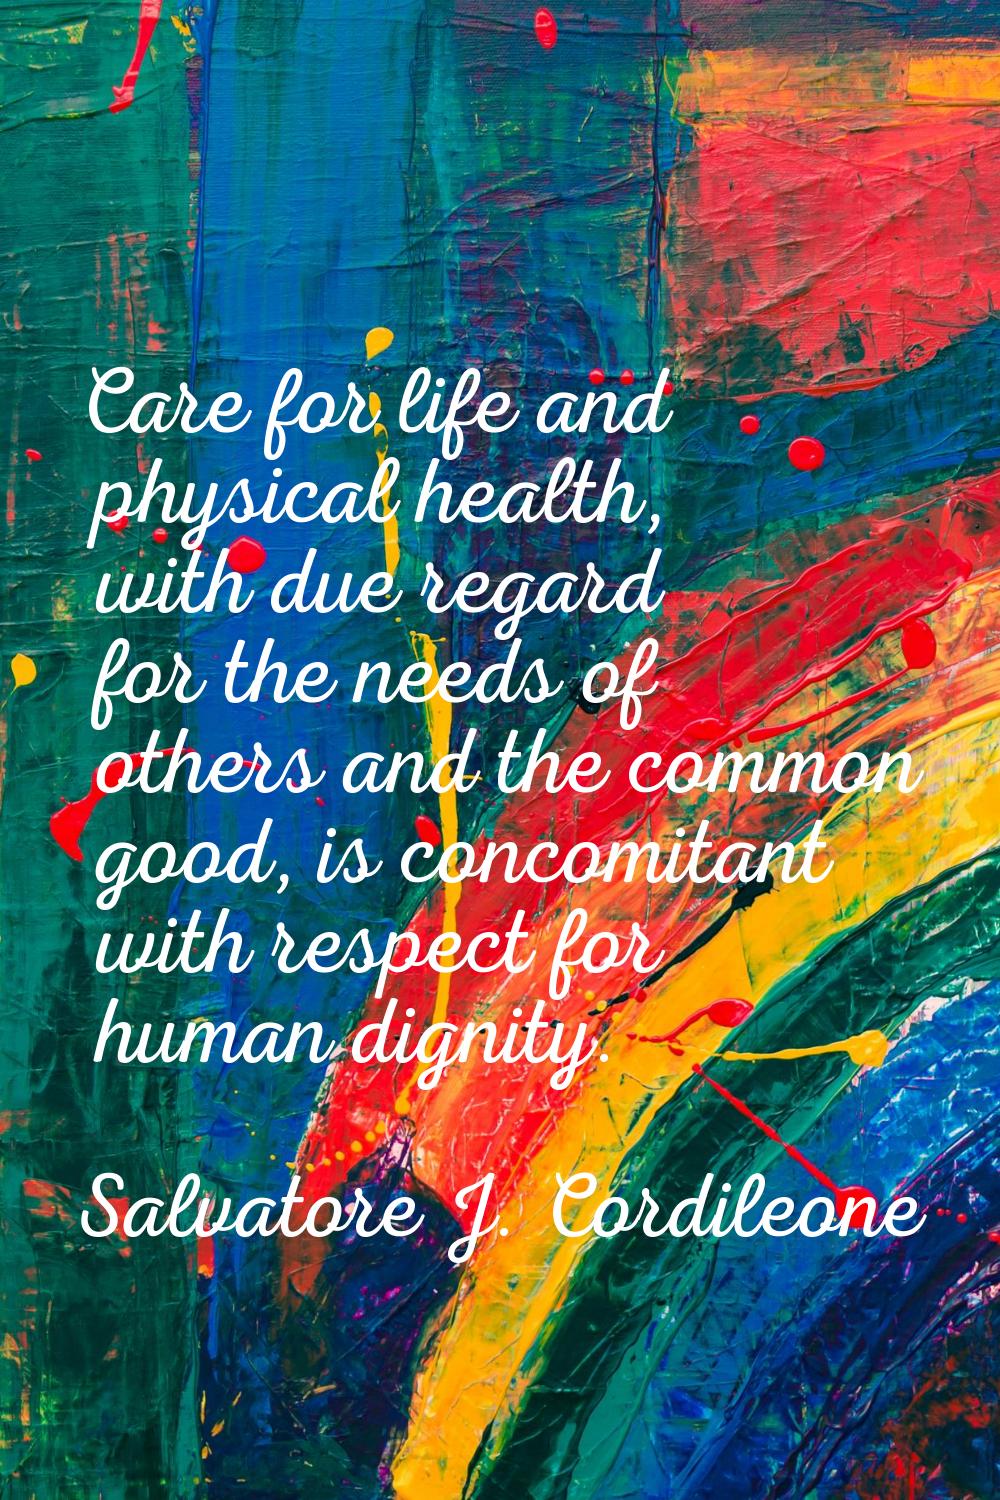 Care for life and physical health, with due regard for the needs of others and the common good, is 